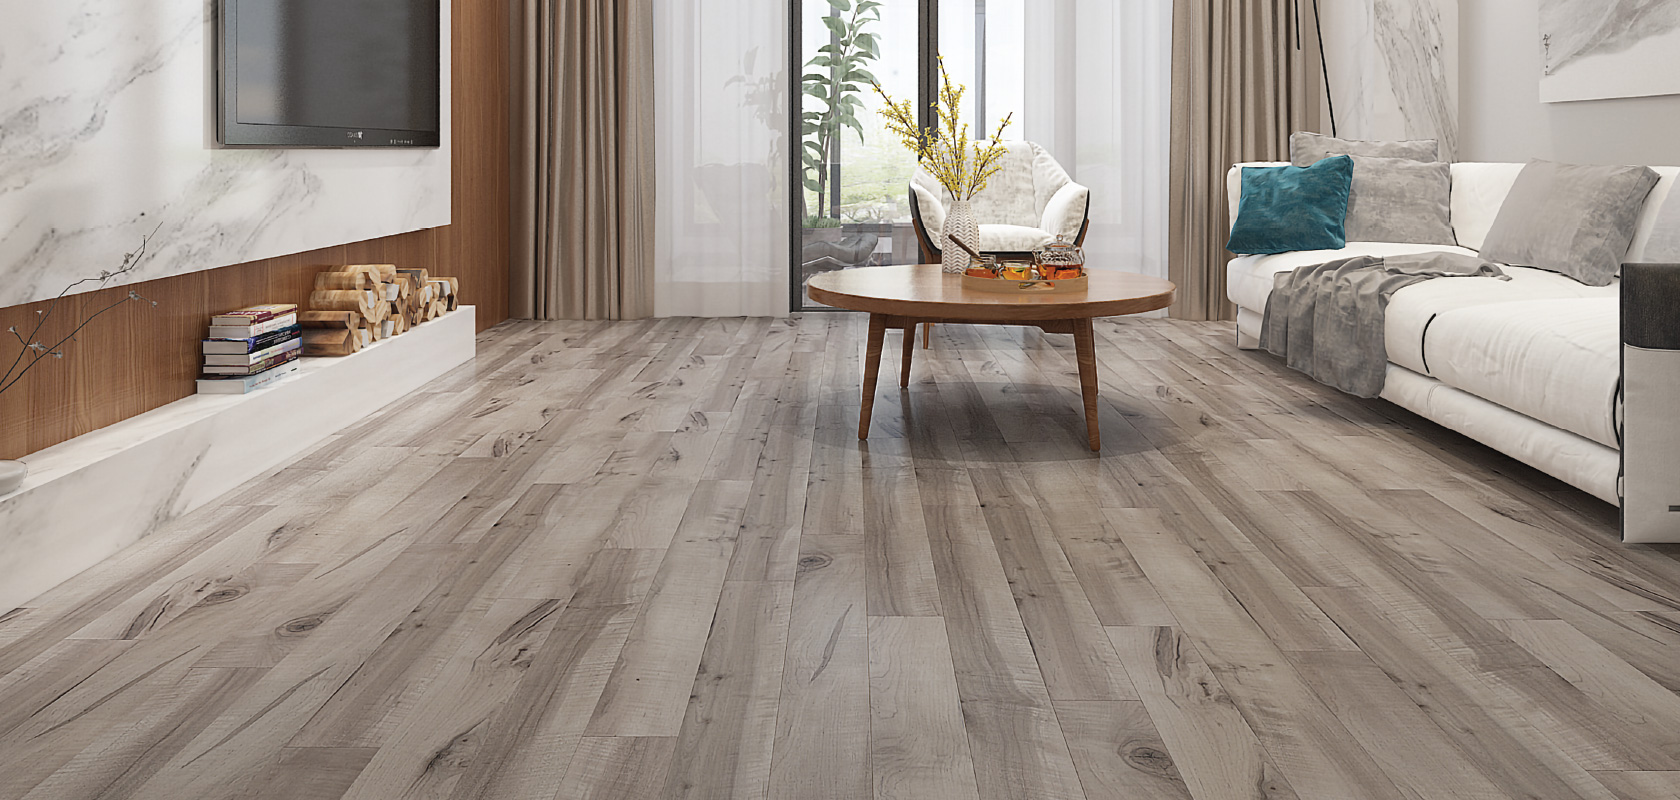 Caring for and Maintaining Laminate Flooring—A How To - Paintshop